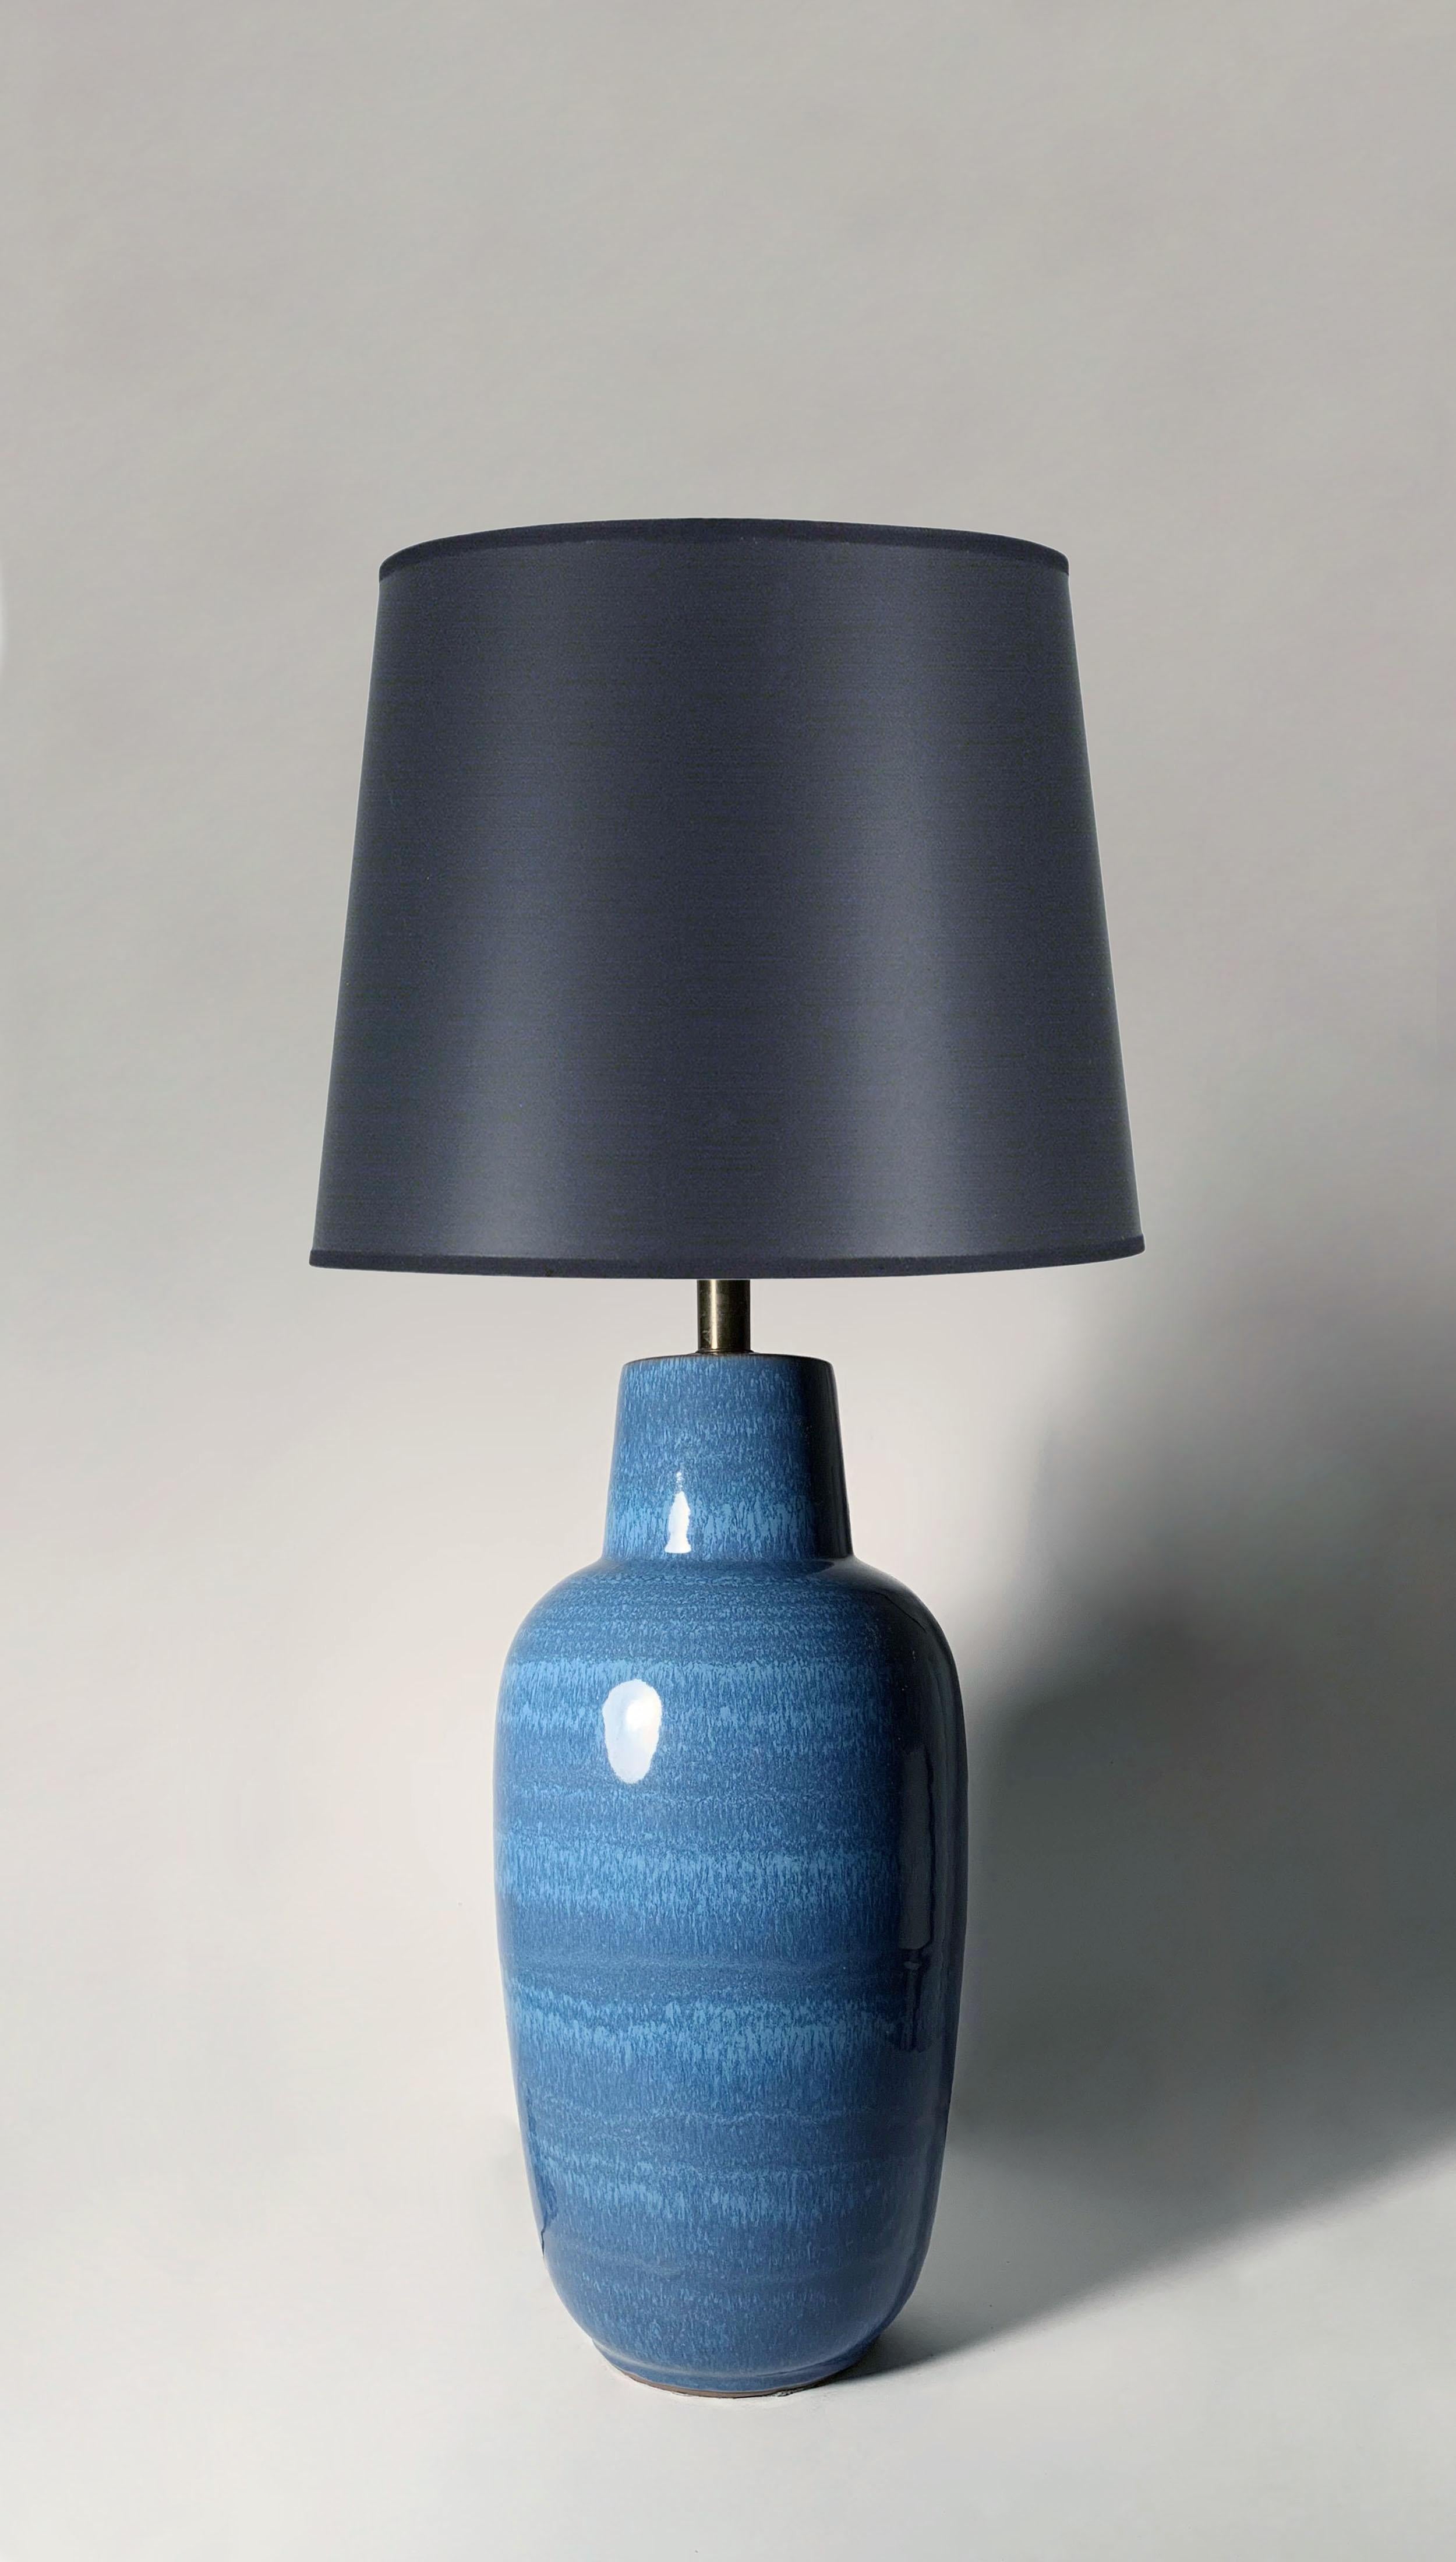 Vintage ceramic/pottery table lamp by Lee Rosen for Design Technics. Beautiful drip blue glaze on this one.

24